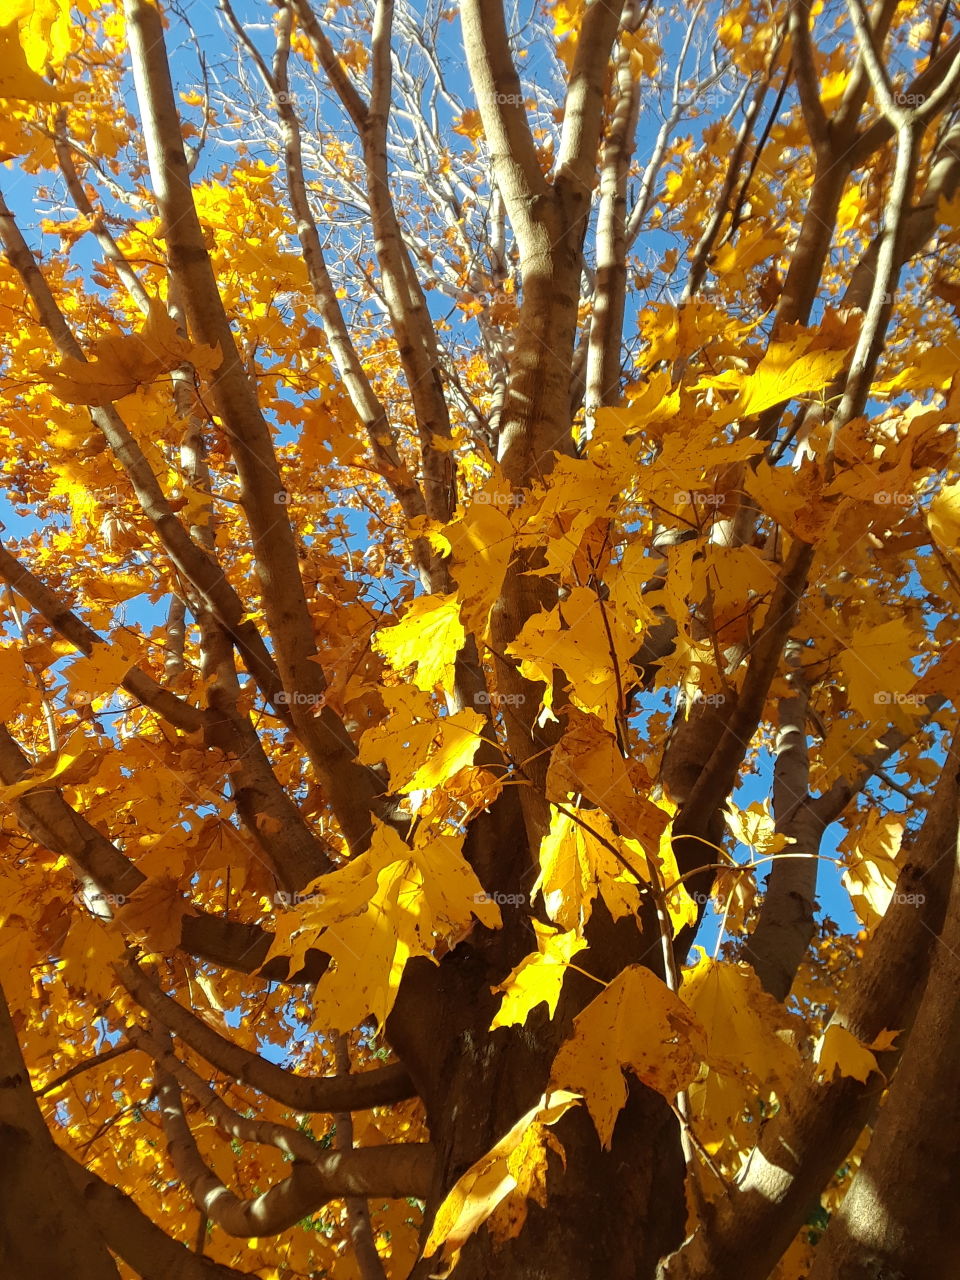 Yellow Leaf Tree From The Inside Looking Up